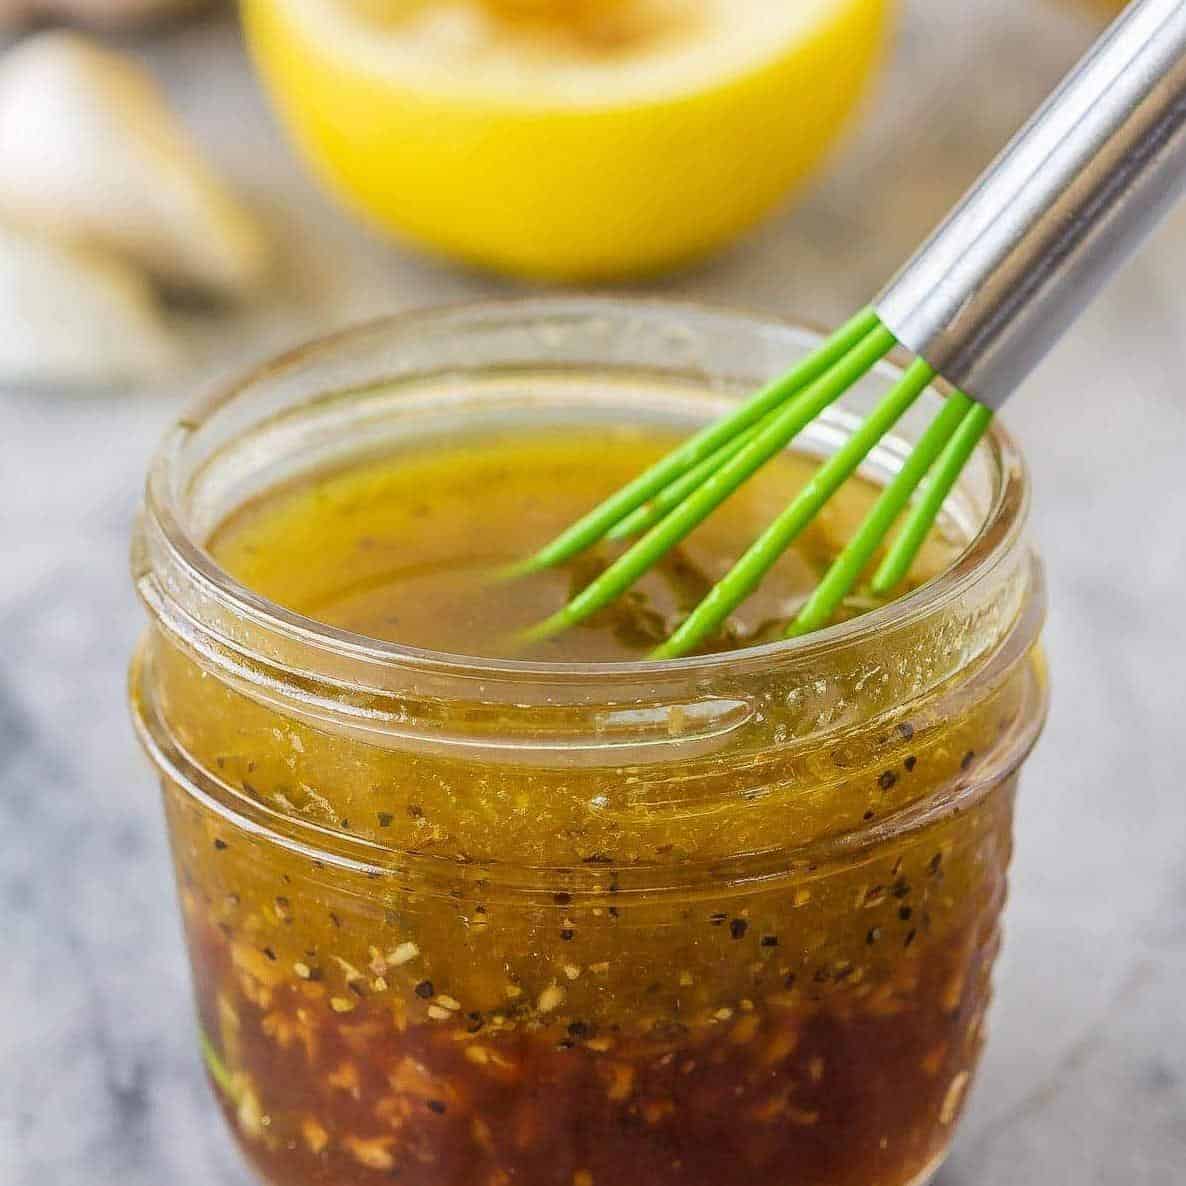  Zesty lemon and savory garlic come together in this flavorful marinade!